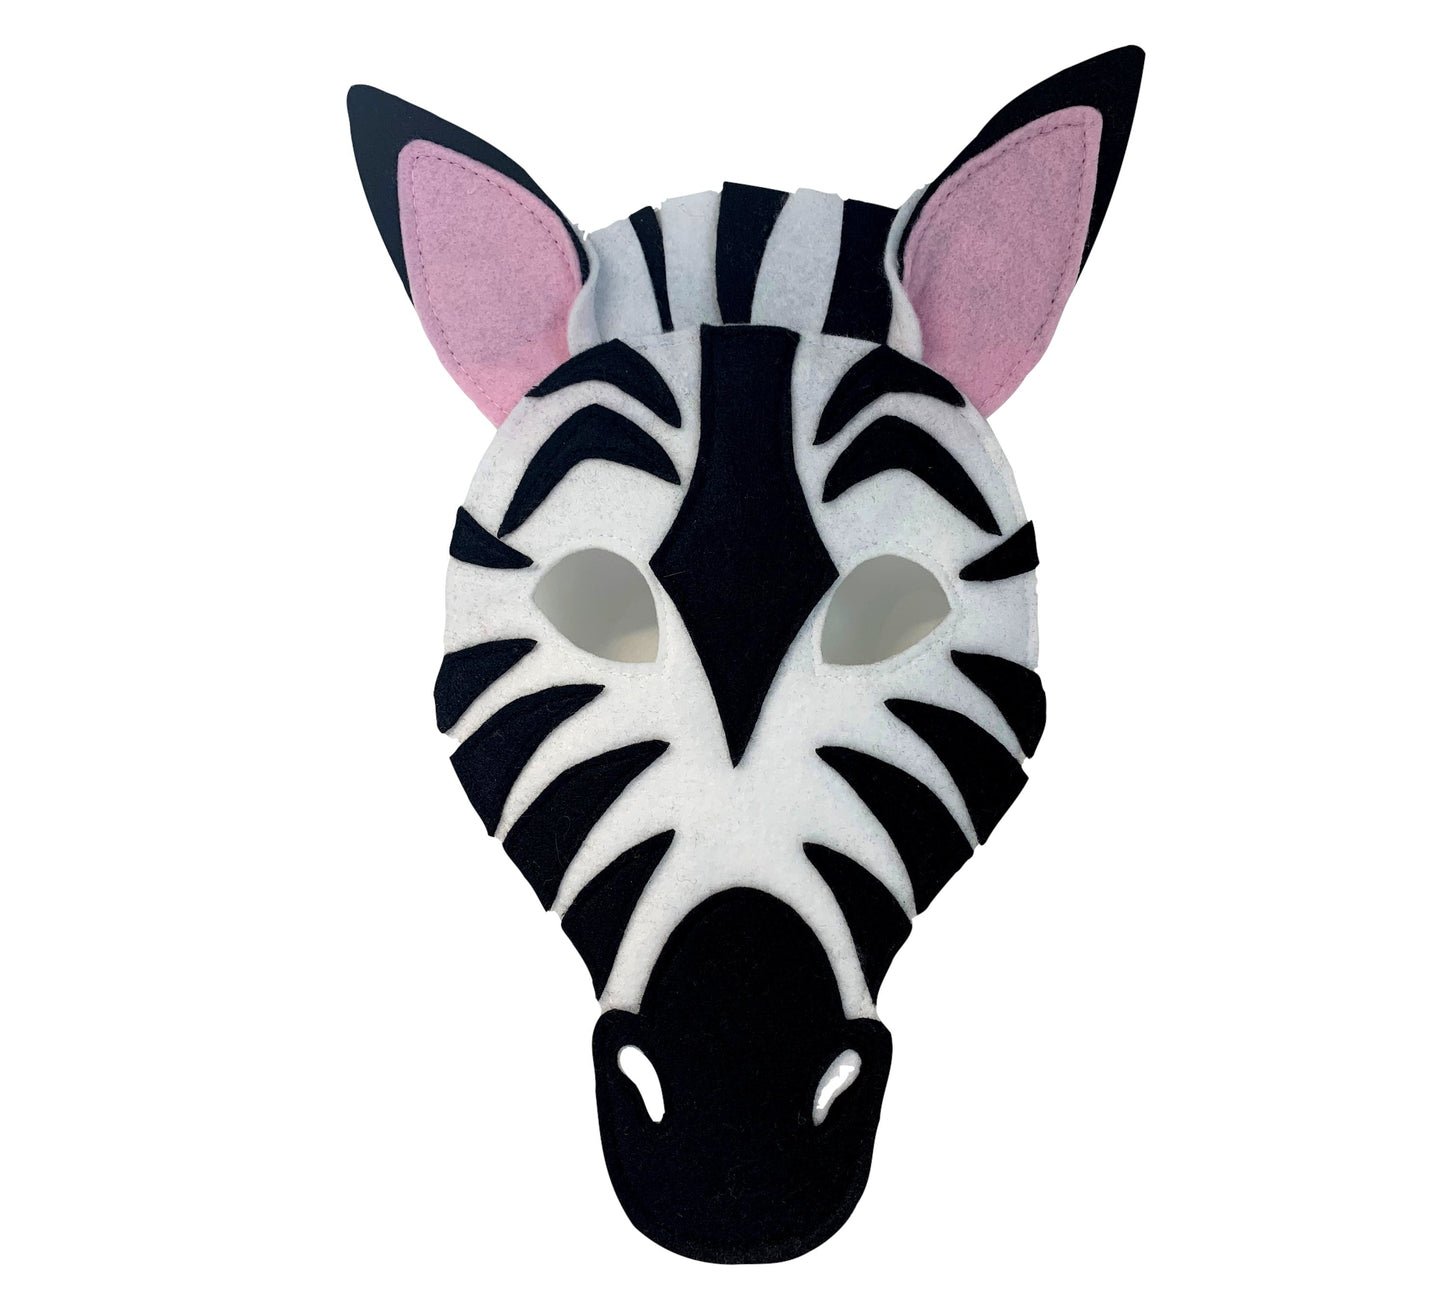 Zebra mask costume children's or adults book day safari party kids adult toddler gift